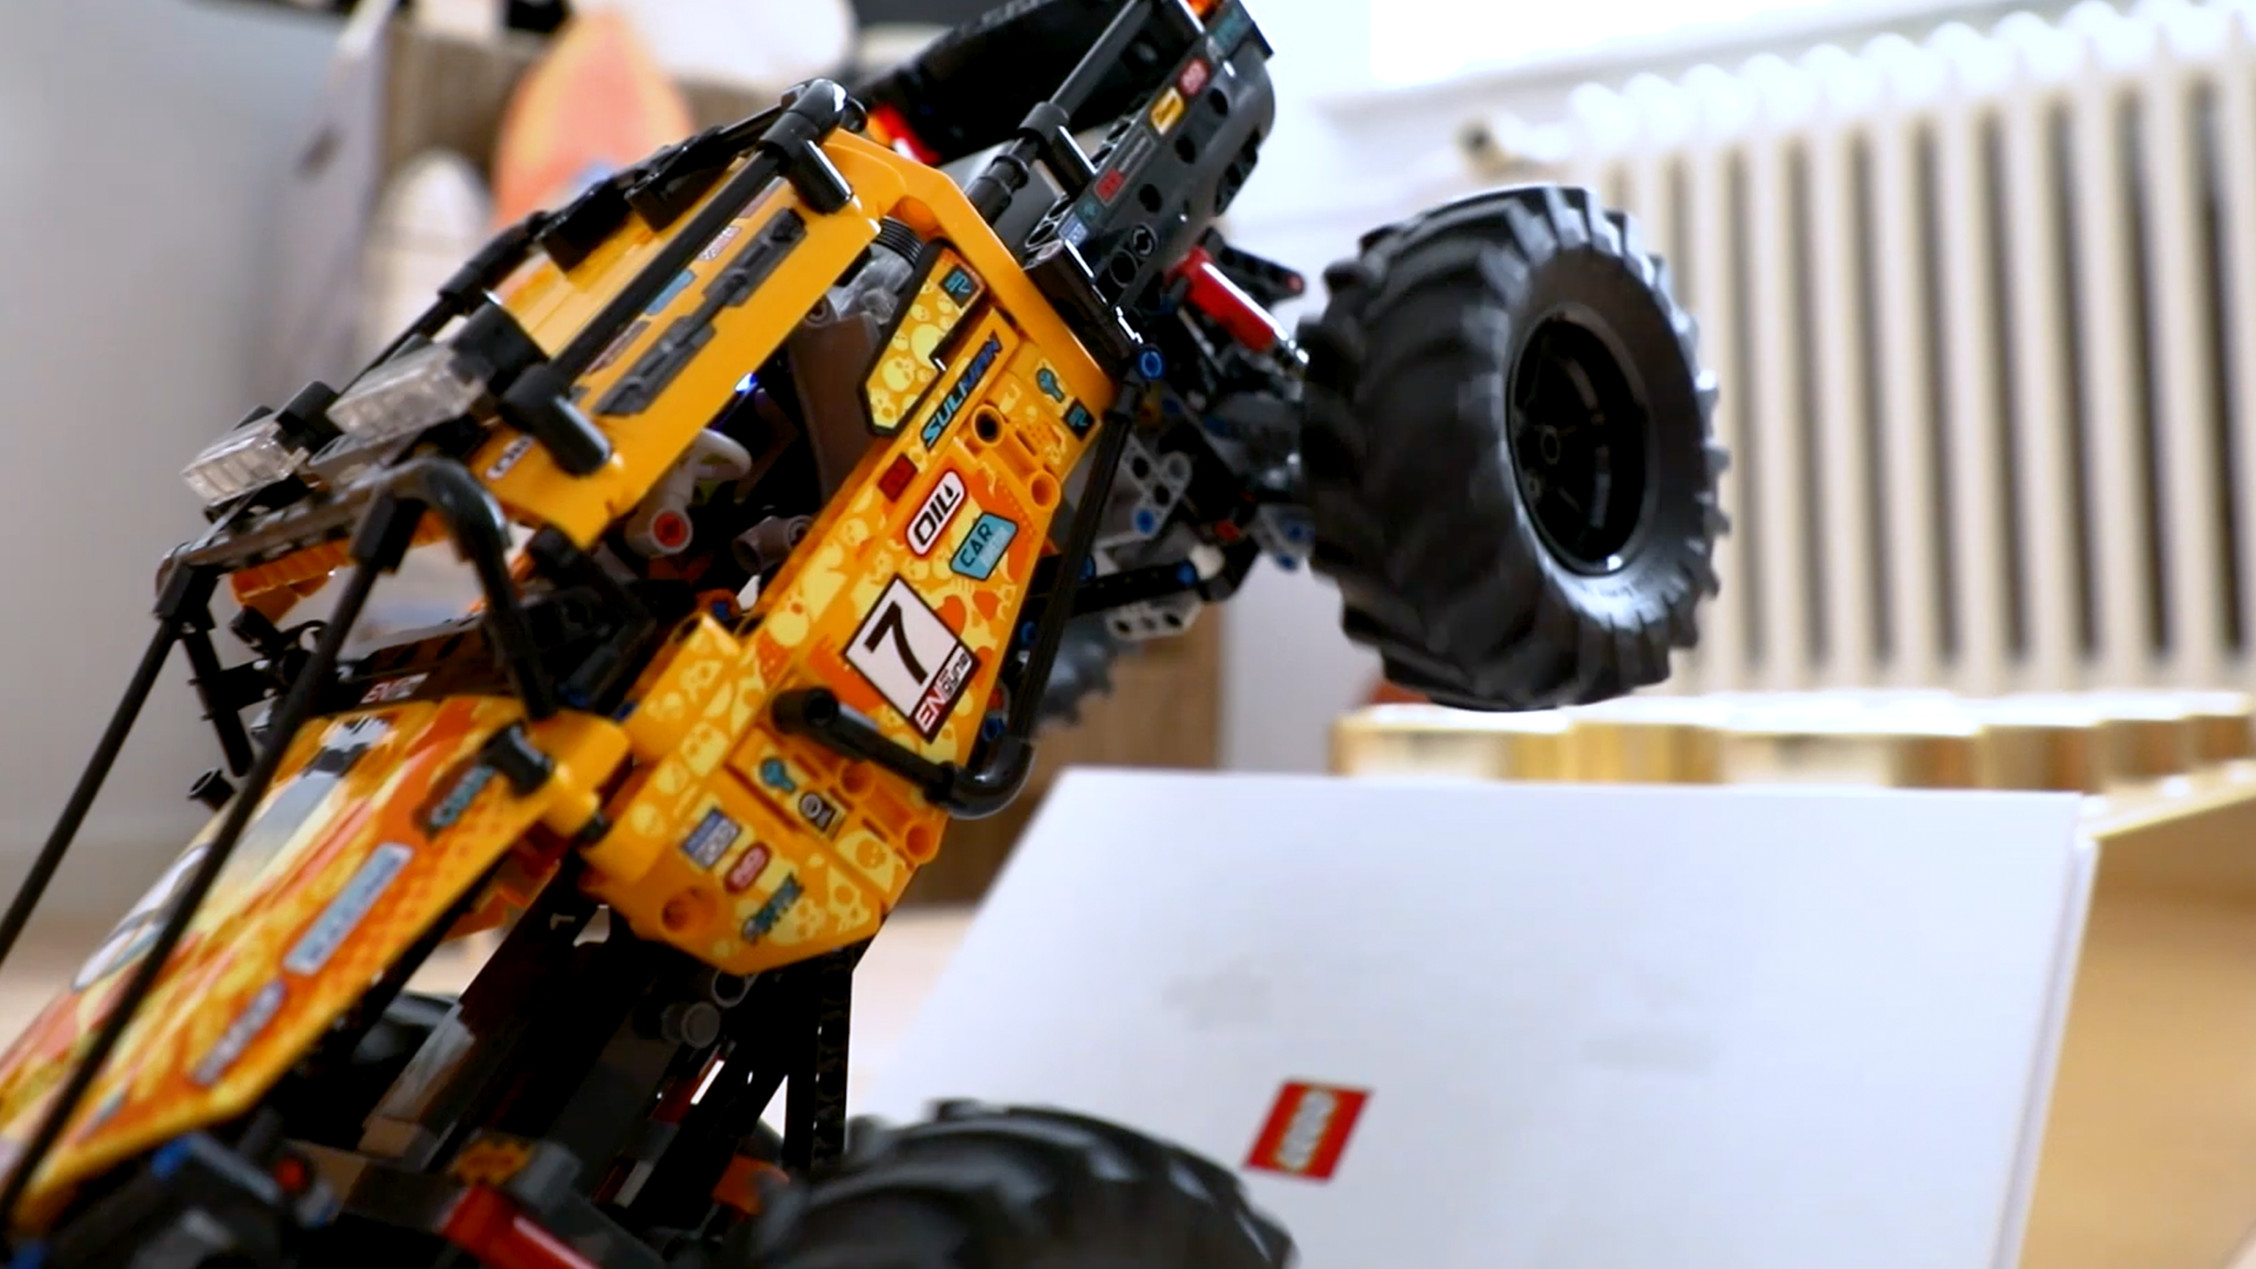 tab Holde Hyret Taking the 4x4 X-treme Off-Roader downhill -- and up again! - LEGO® Technic  Videos - LEGO.com for kids